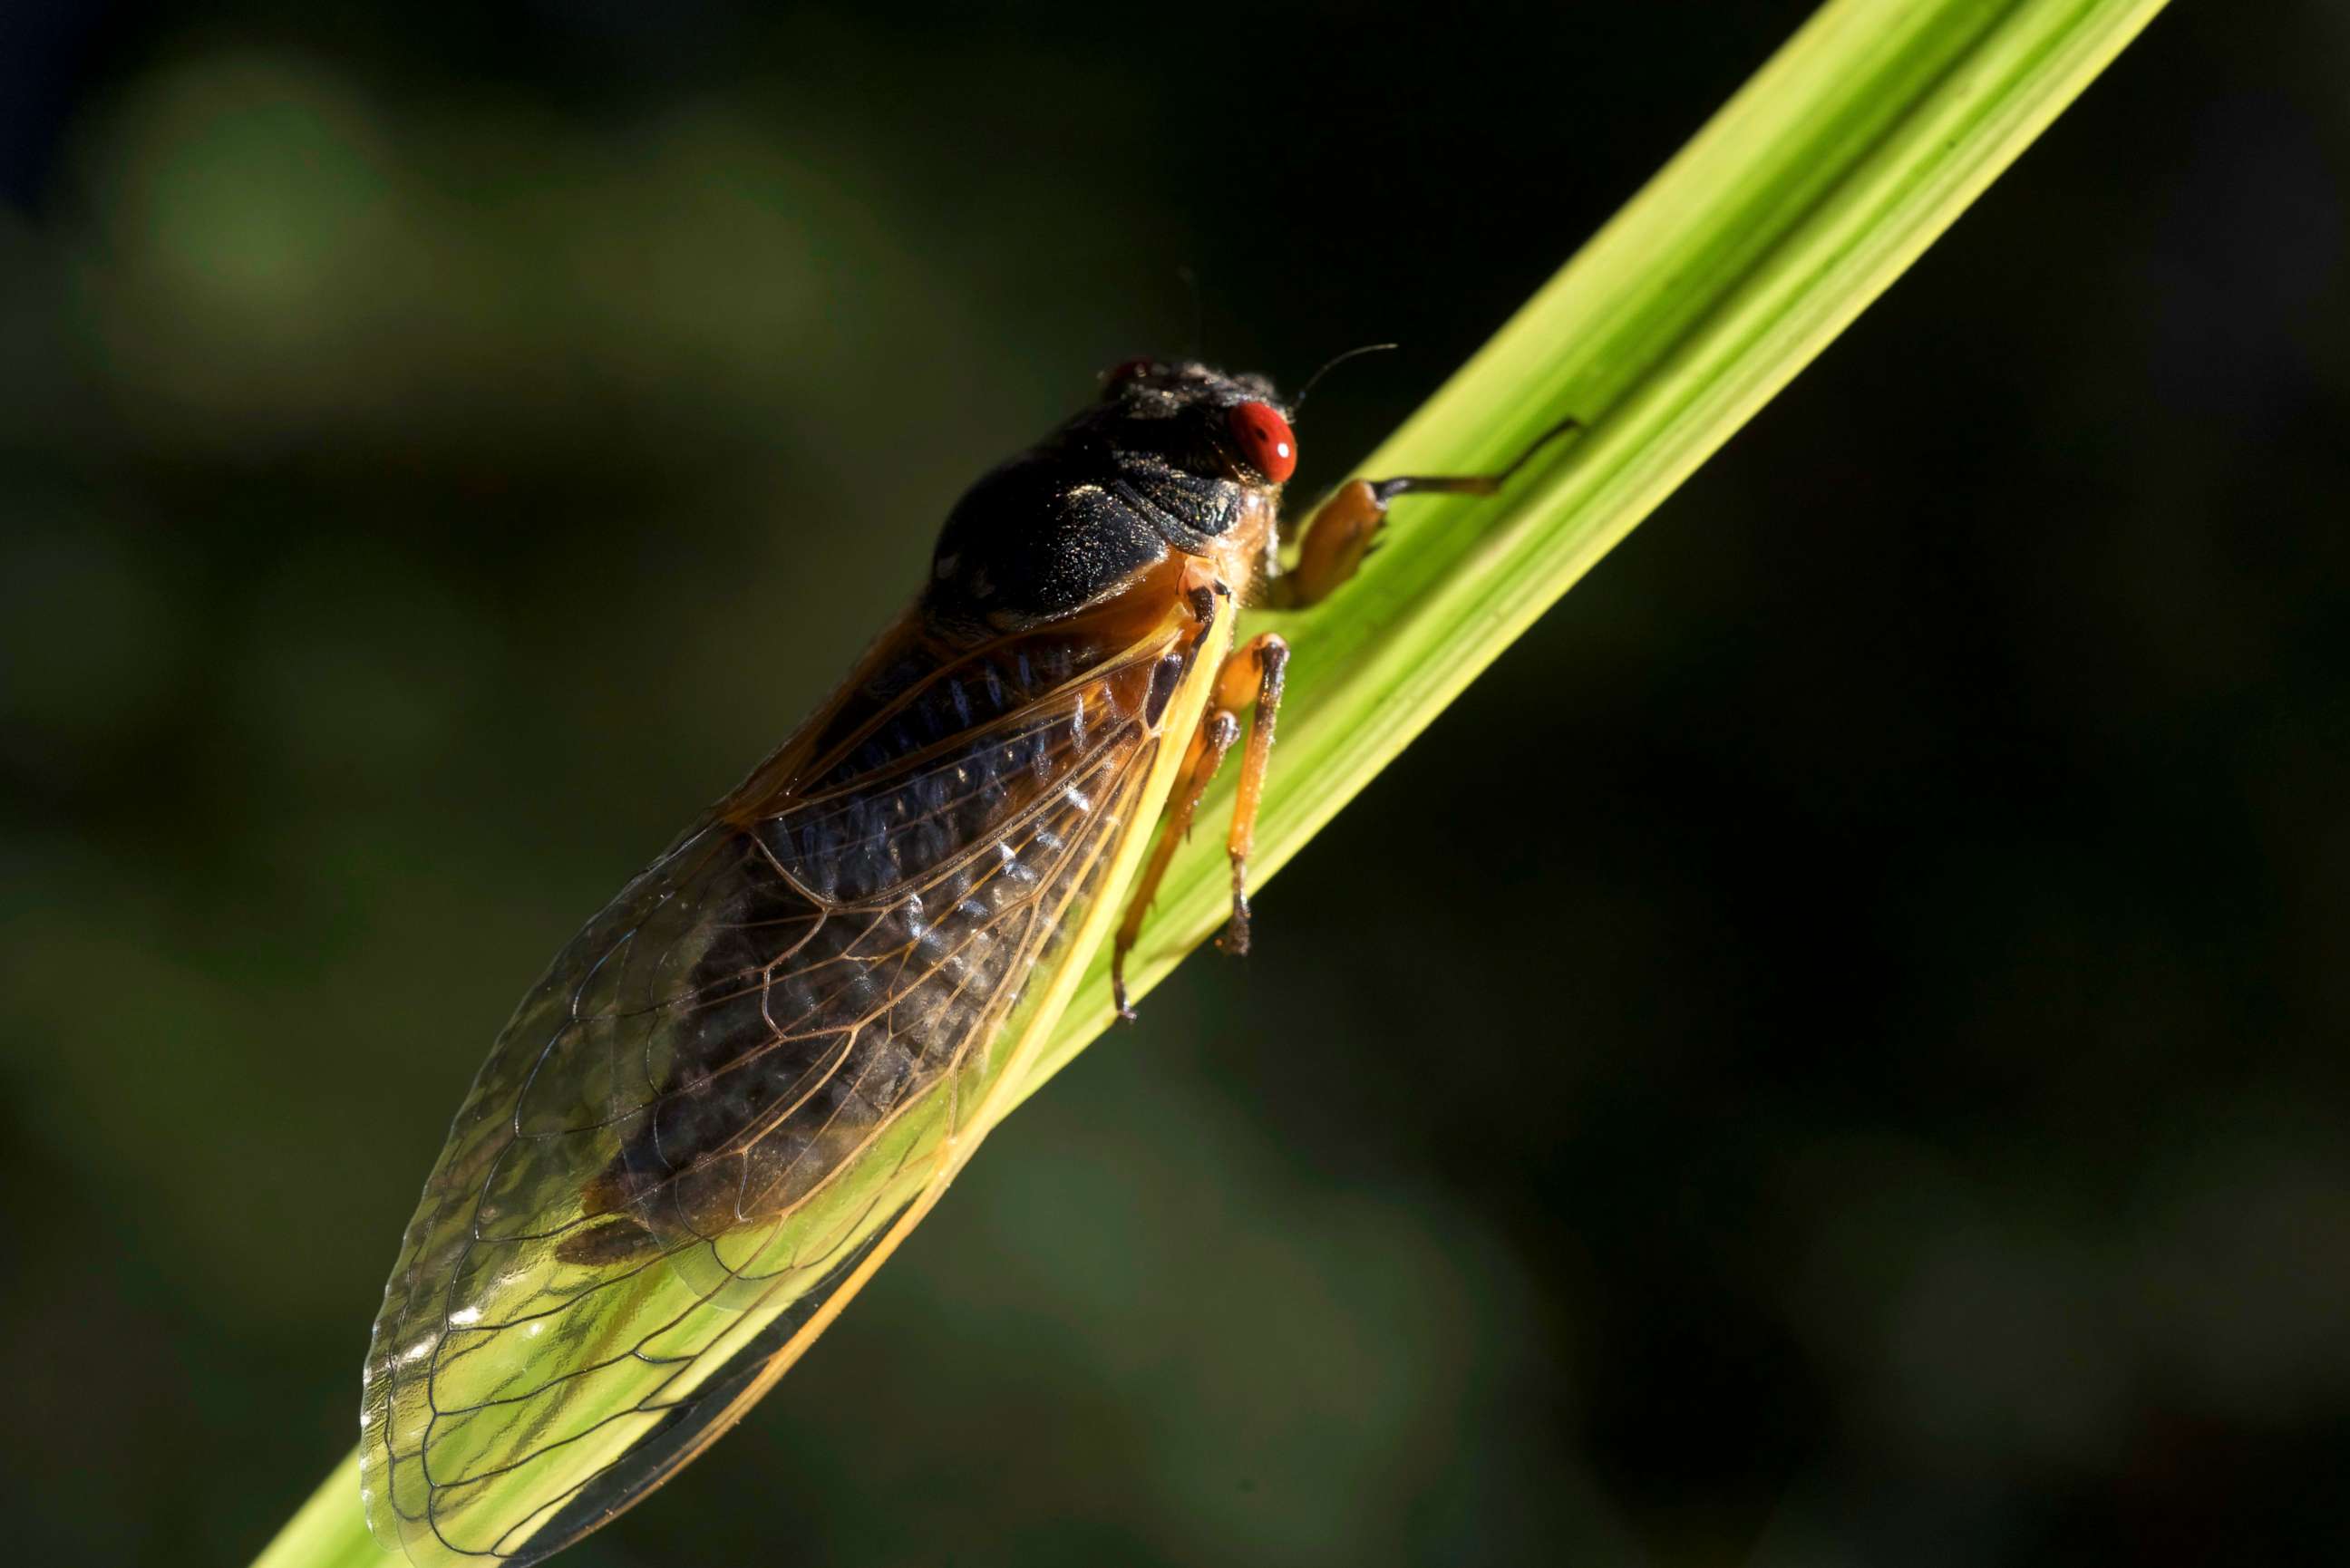 PHOTO: A cicada is seen on a branch in Virginia in this stock photo.